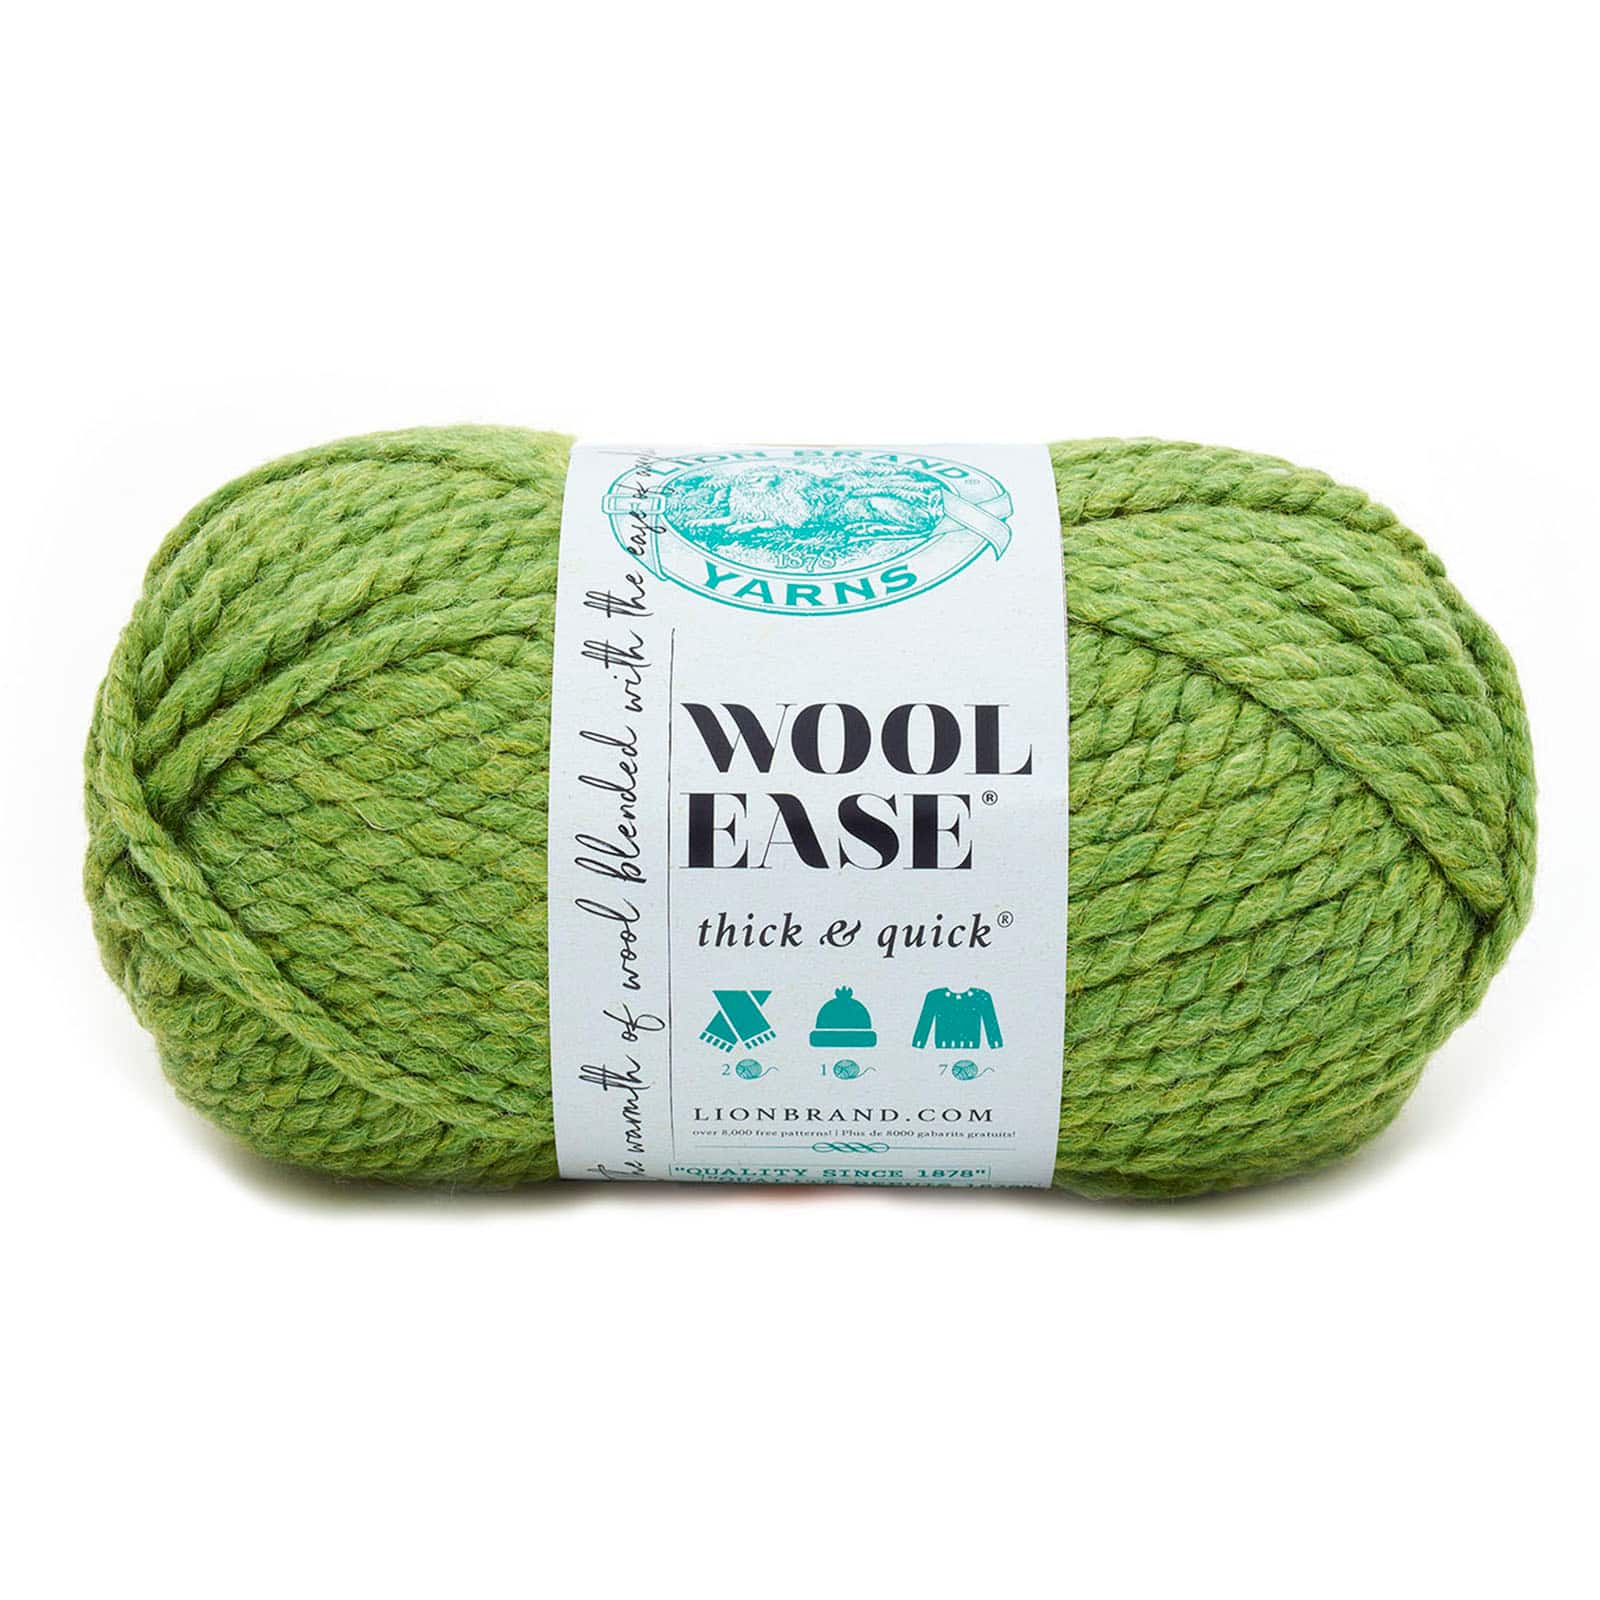 3 Lion Brand Wool-Ease Thick & Quick Yarn Grey Marble 6oz 